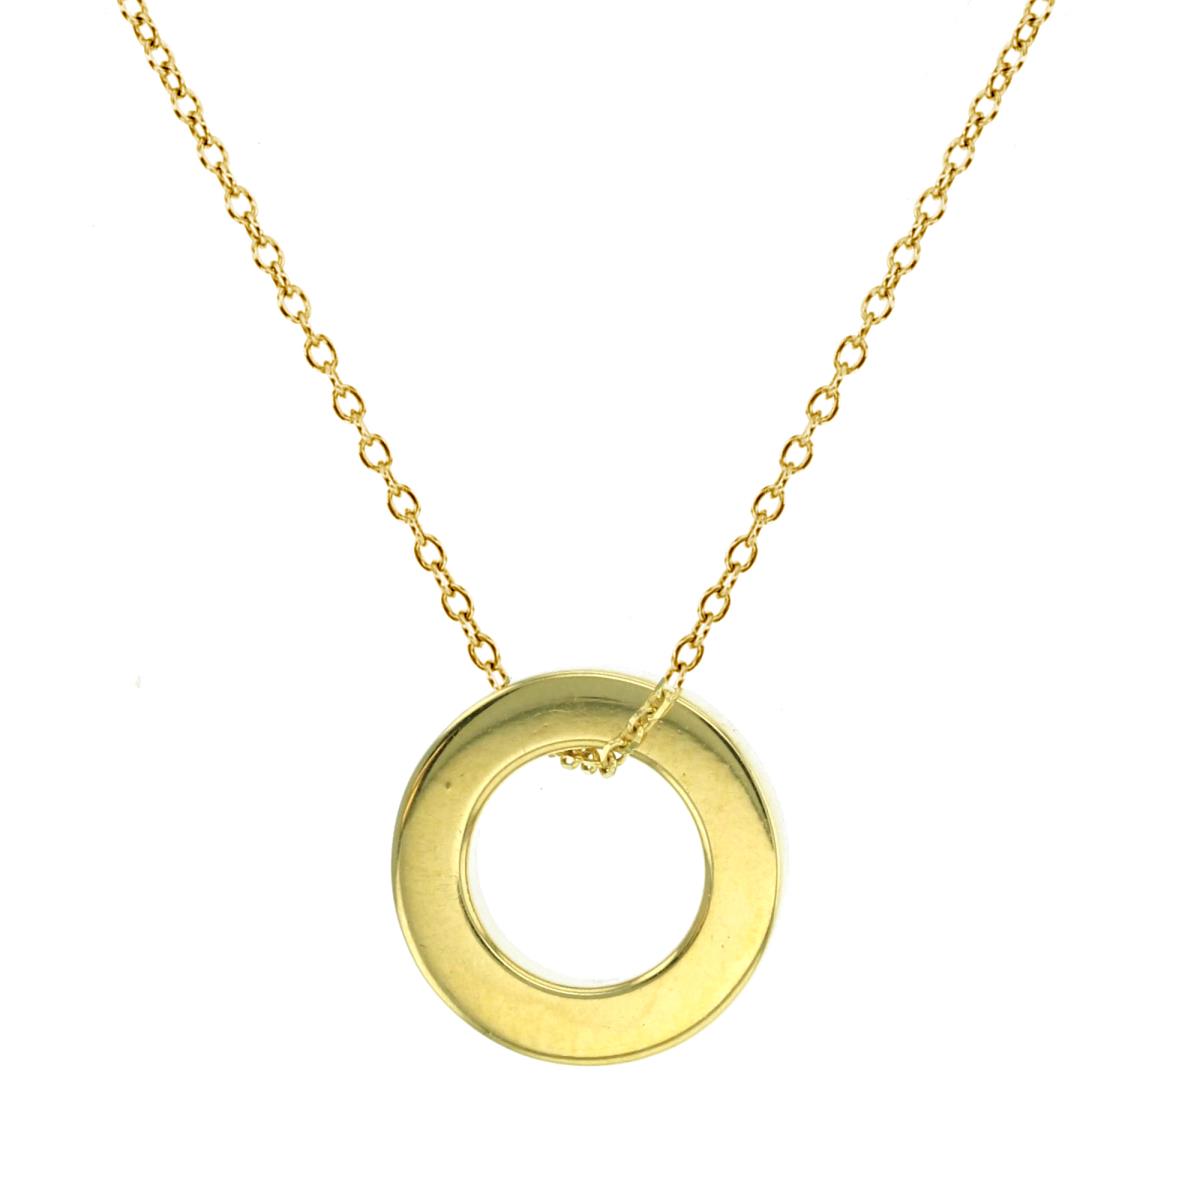 14K Yellow Gold 17" Cable Chain With Circle Pendant Necklace